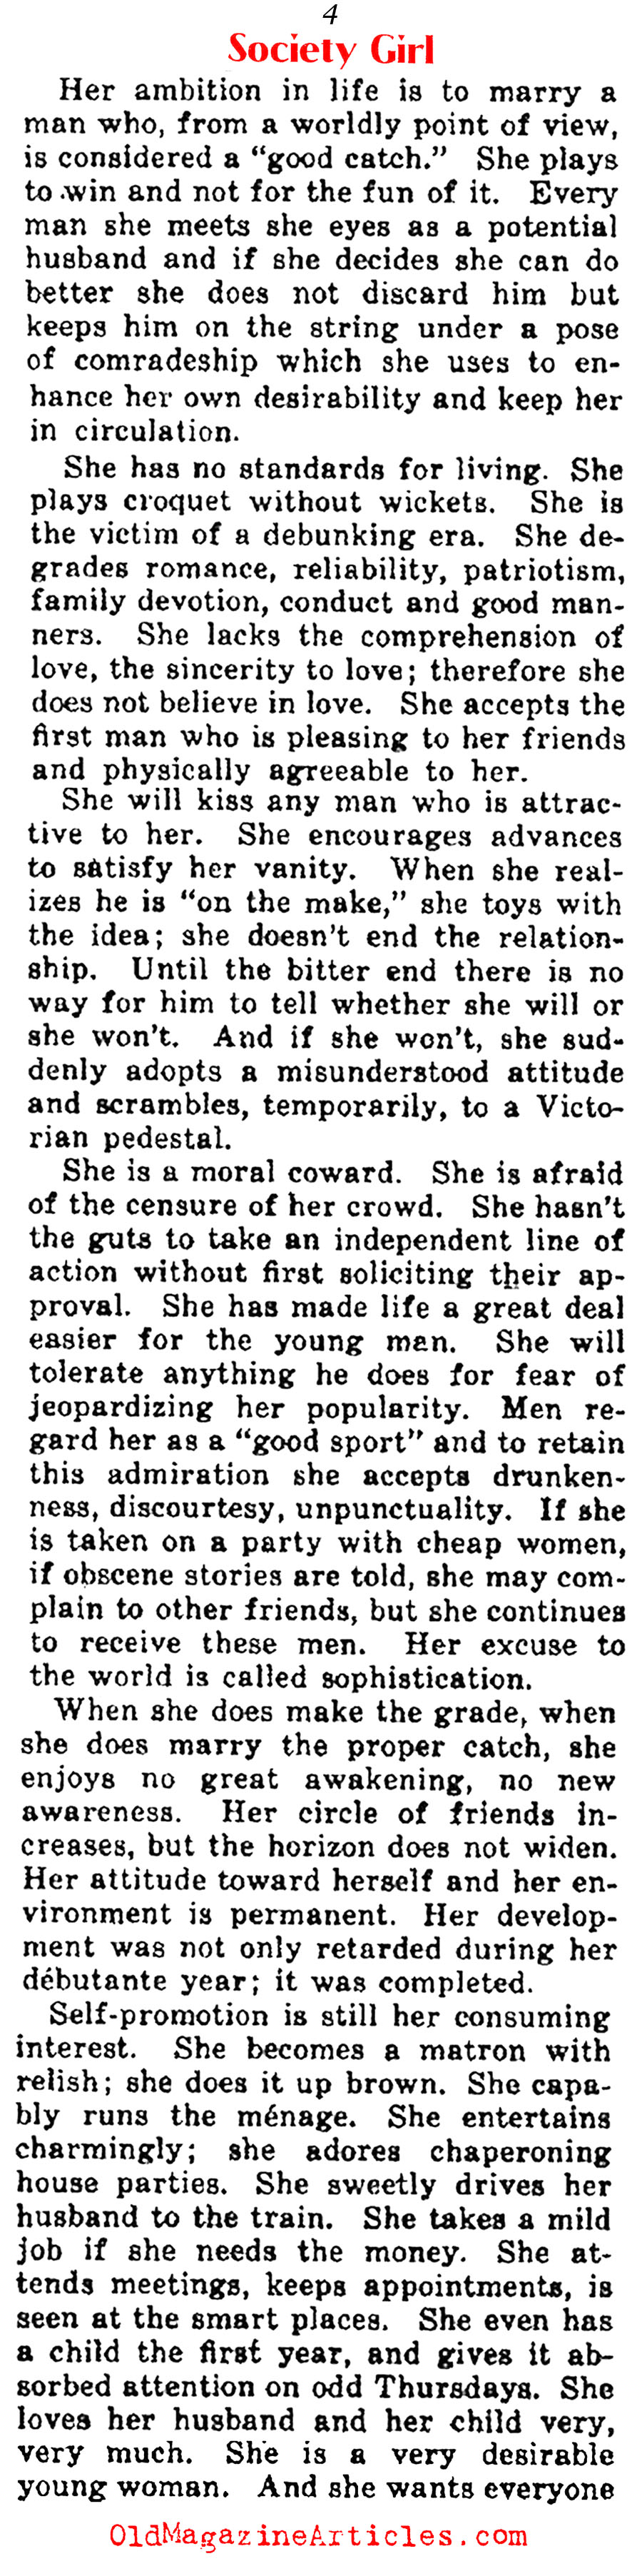 The Down-Hill Side of Being a Society Girl  (Collier's Magazine, 1933)